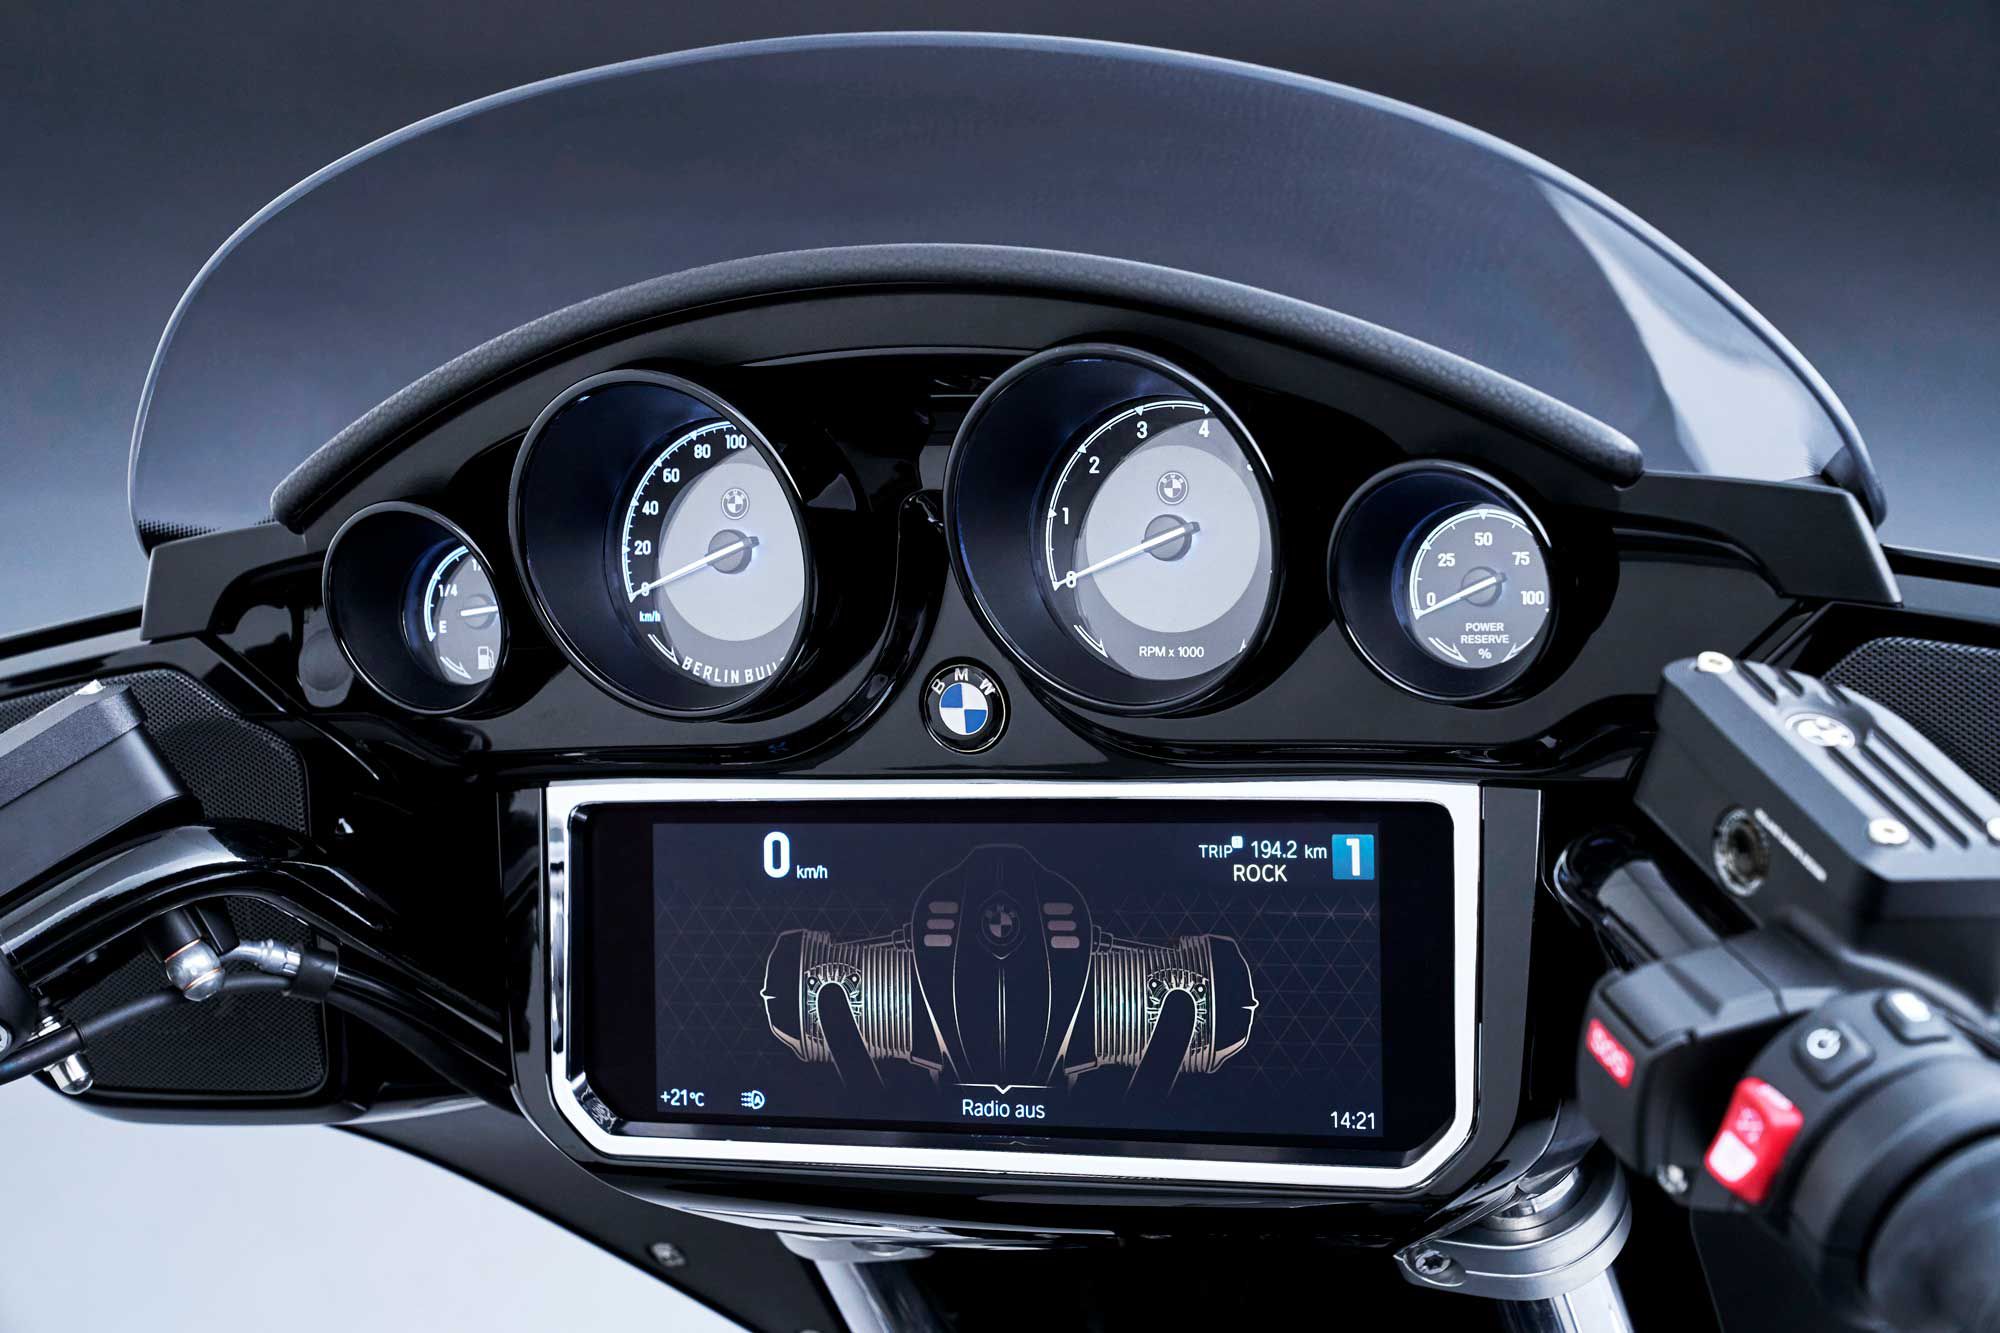 Both new cruisers get a spacious cockpit with 10.5-inch TFT display.